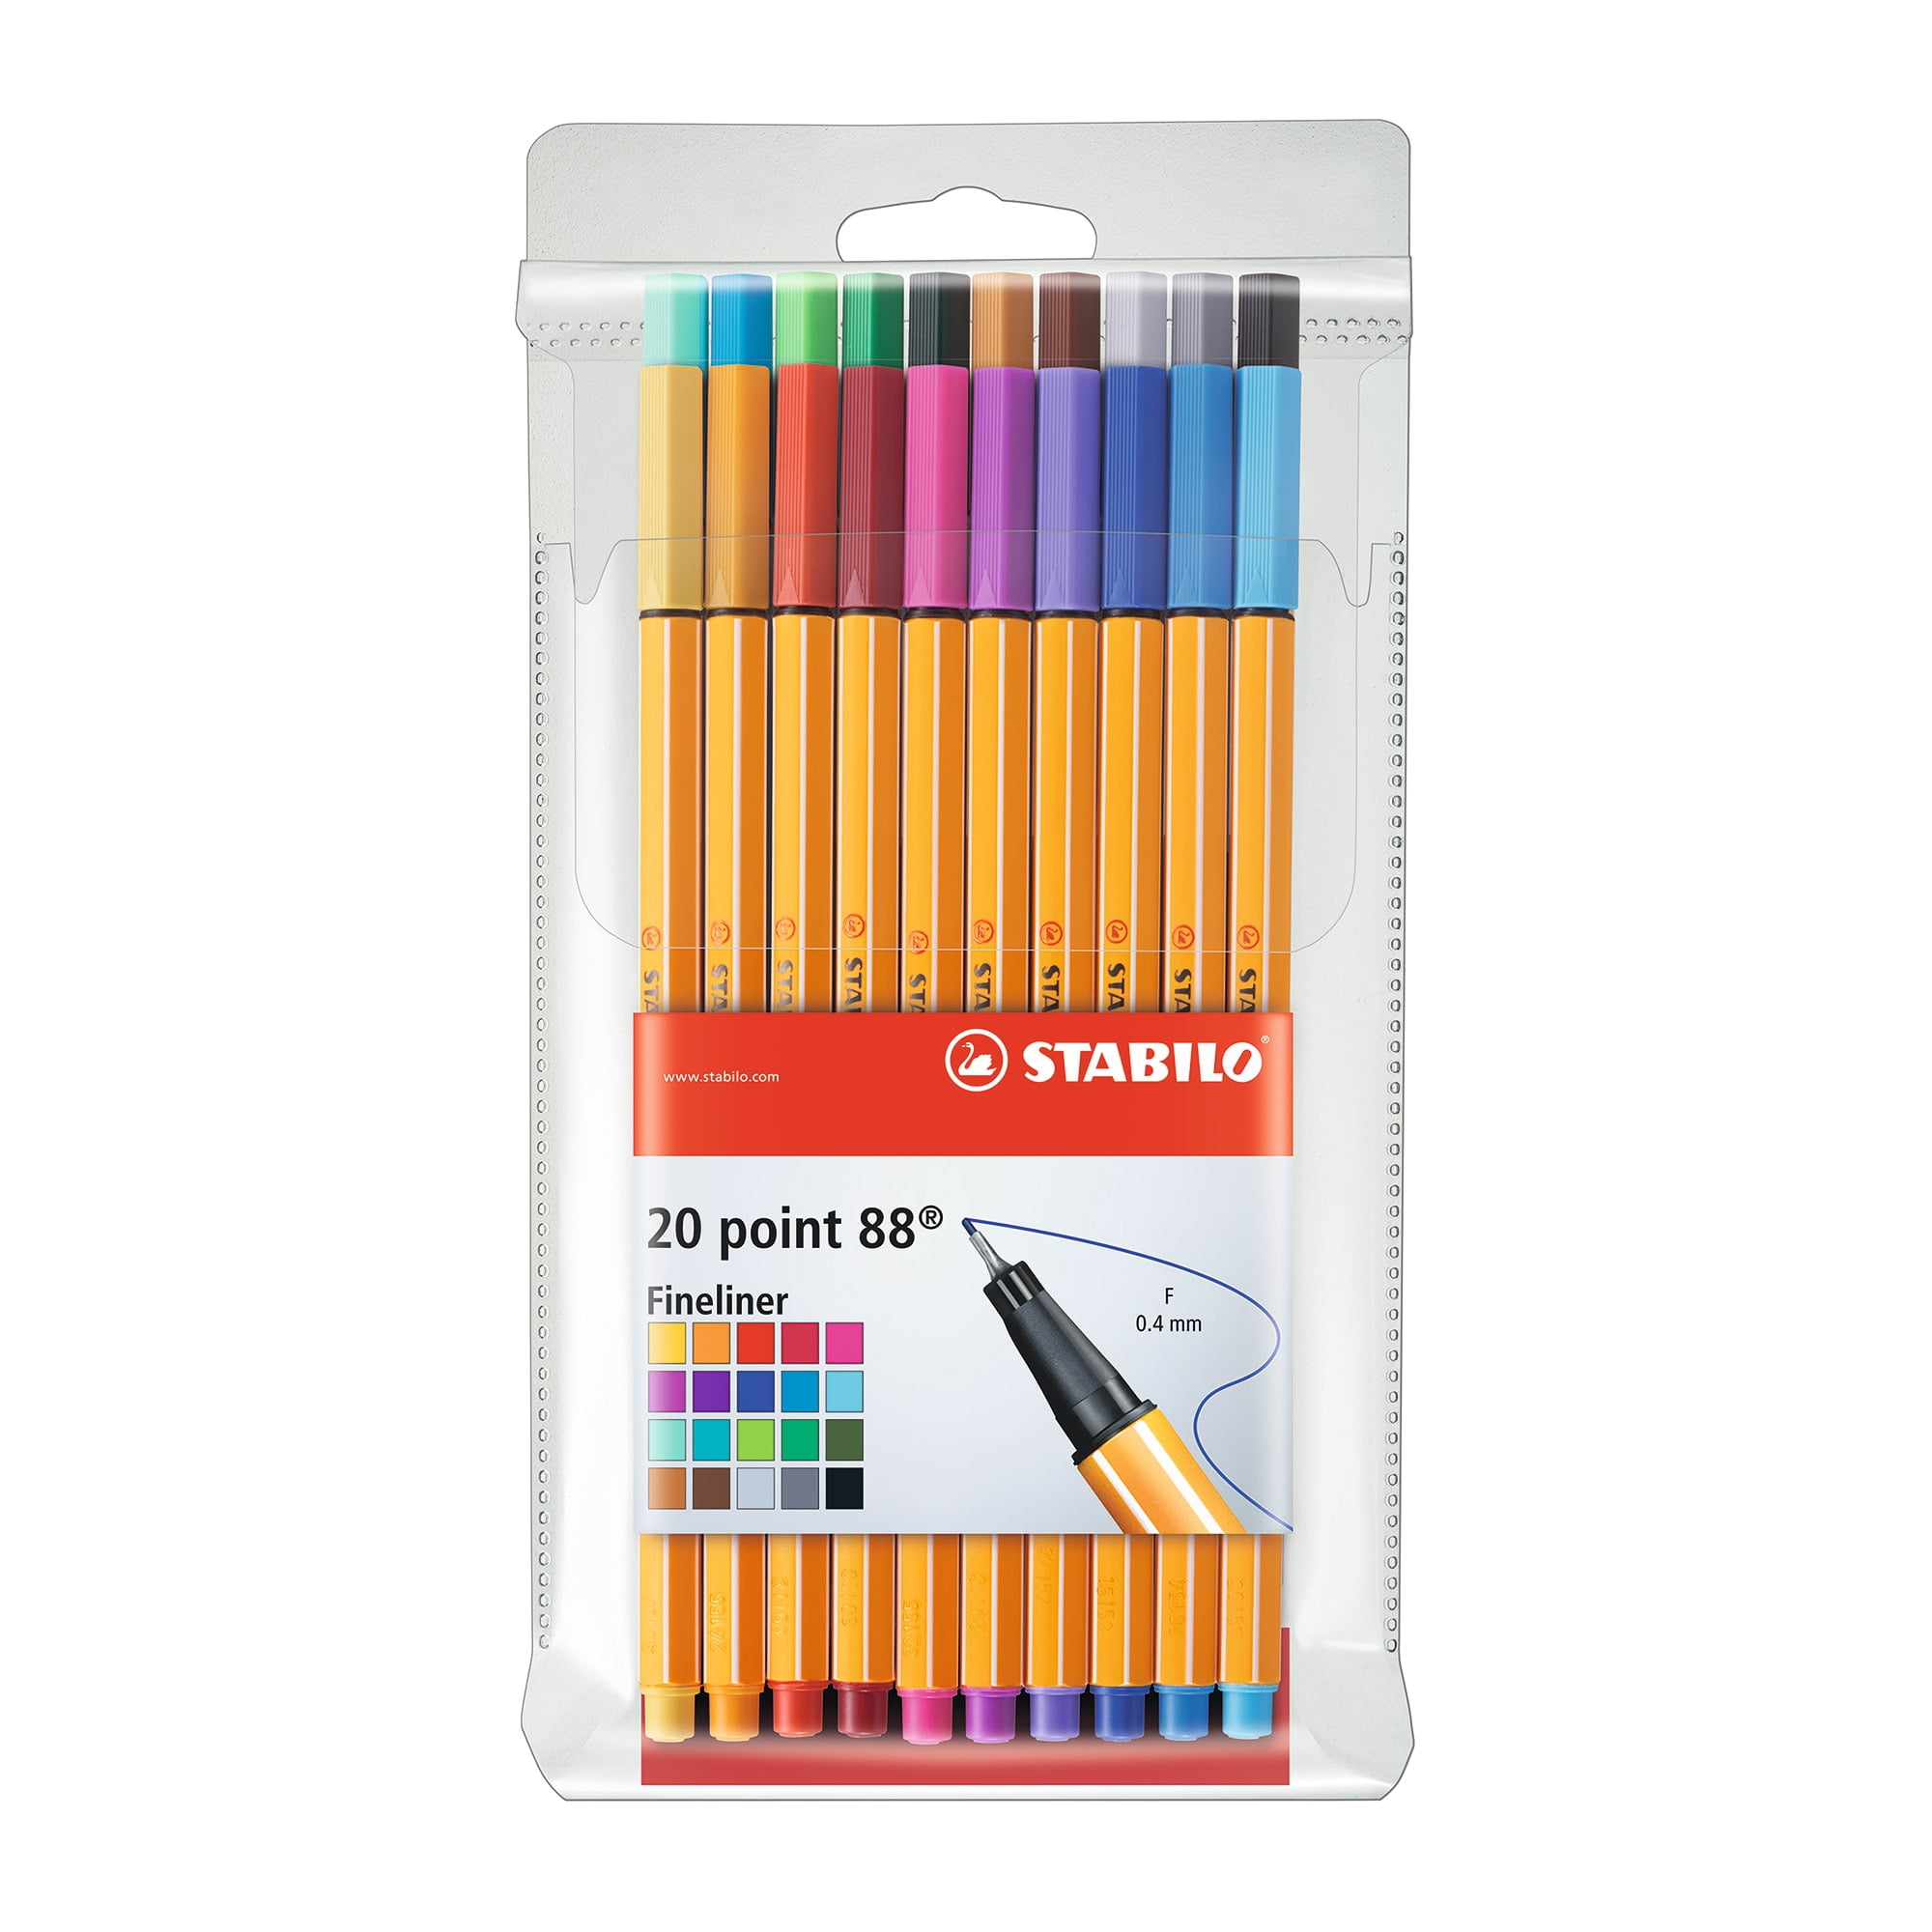 Fineliner - Stabilo Point 88 - Wallet of 25 - Assorted Colors